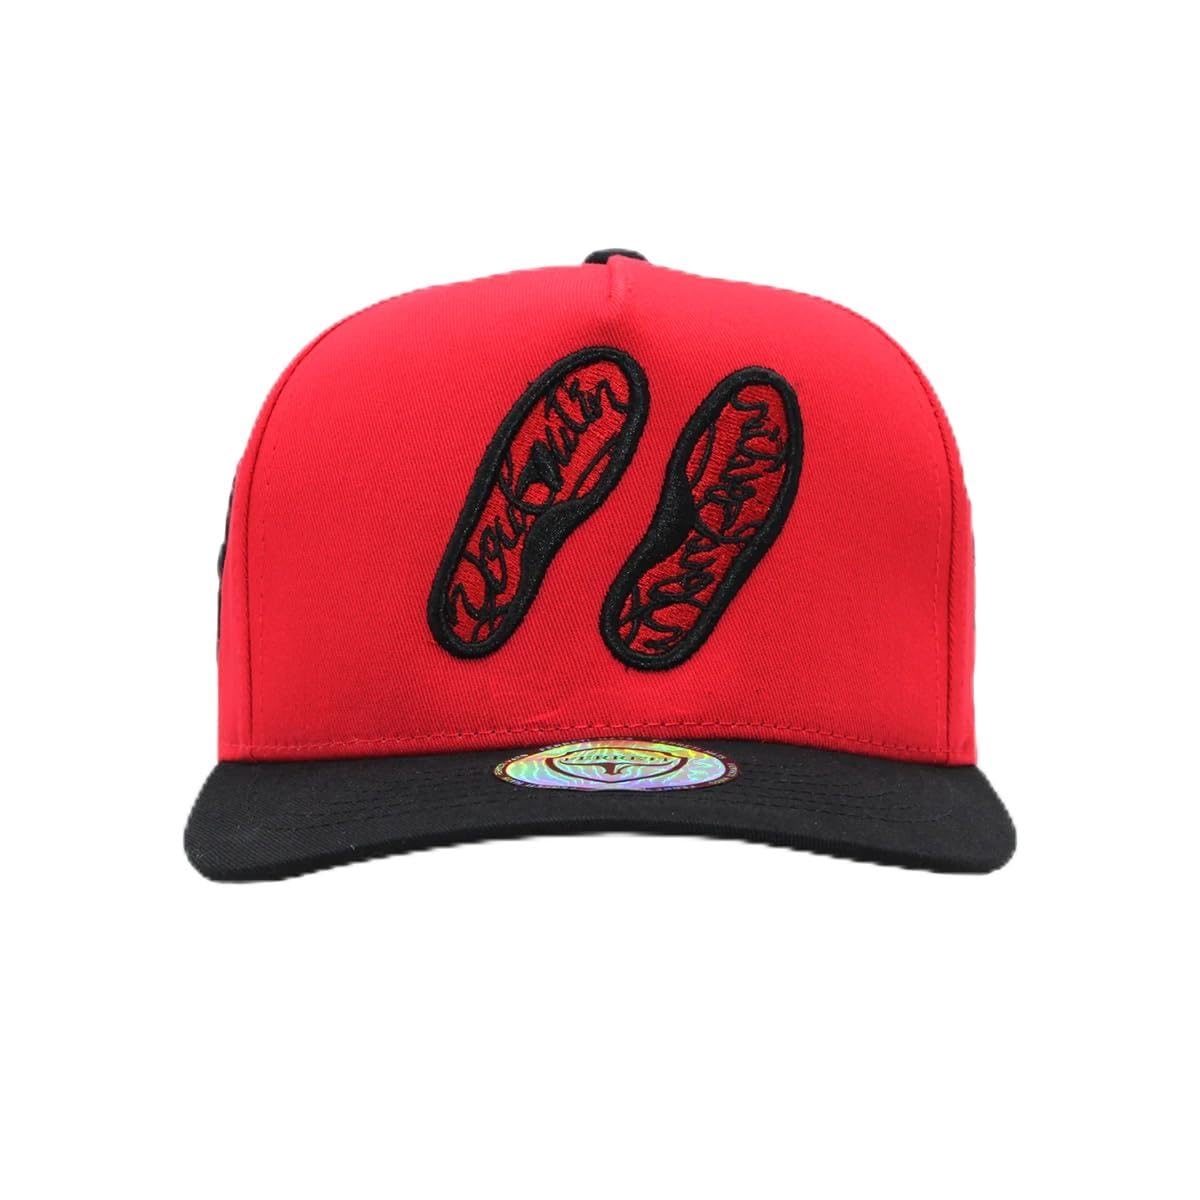 Ferreti Culiacan Suelita Red and Black Baseball Hat - Snapback Hats for Men and Women, Men's Baseball Caps, Gorra para Hombre, Ajustable Size - Caps Fitted Caps Fitted Ferreti